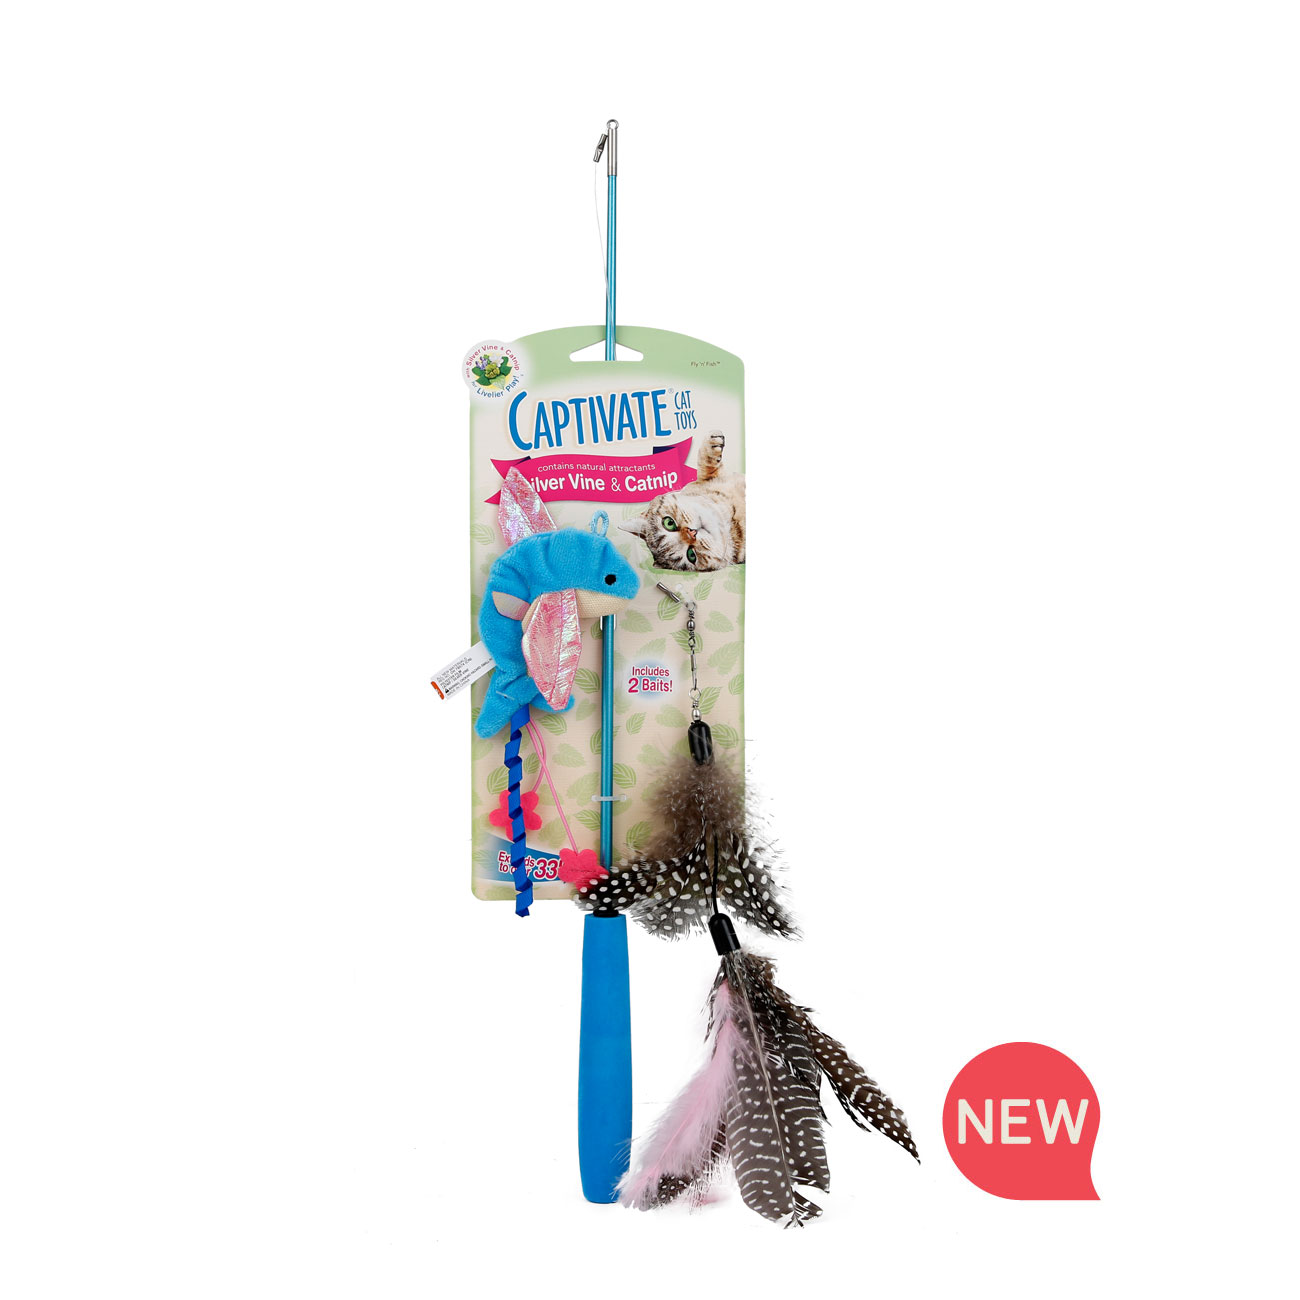 New! Hartz captivate fish n fly cat toy with silver vine and catnip. Hartz SKU#3270011252